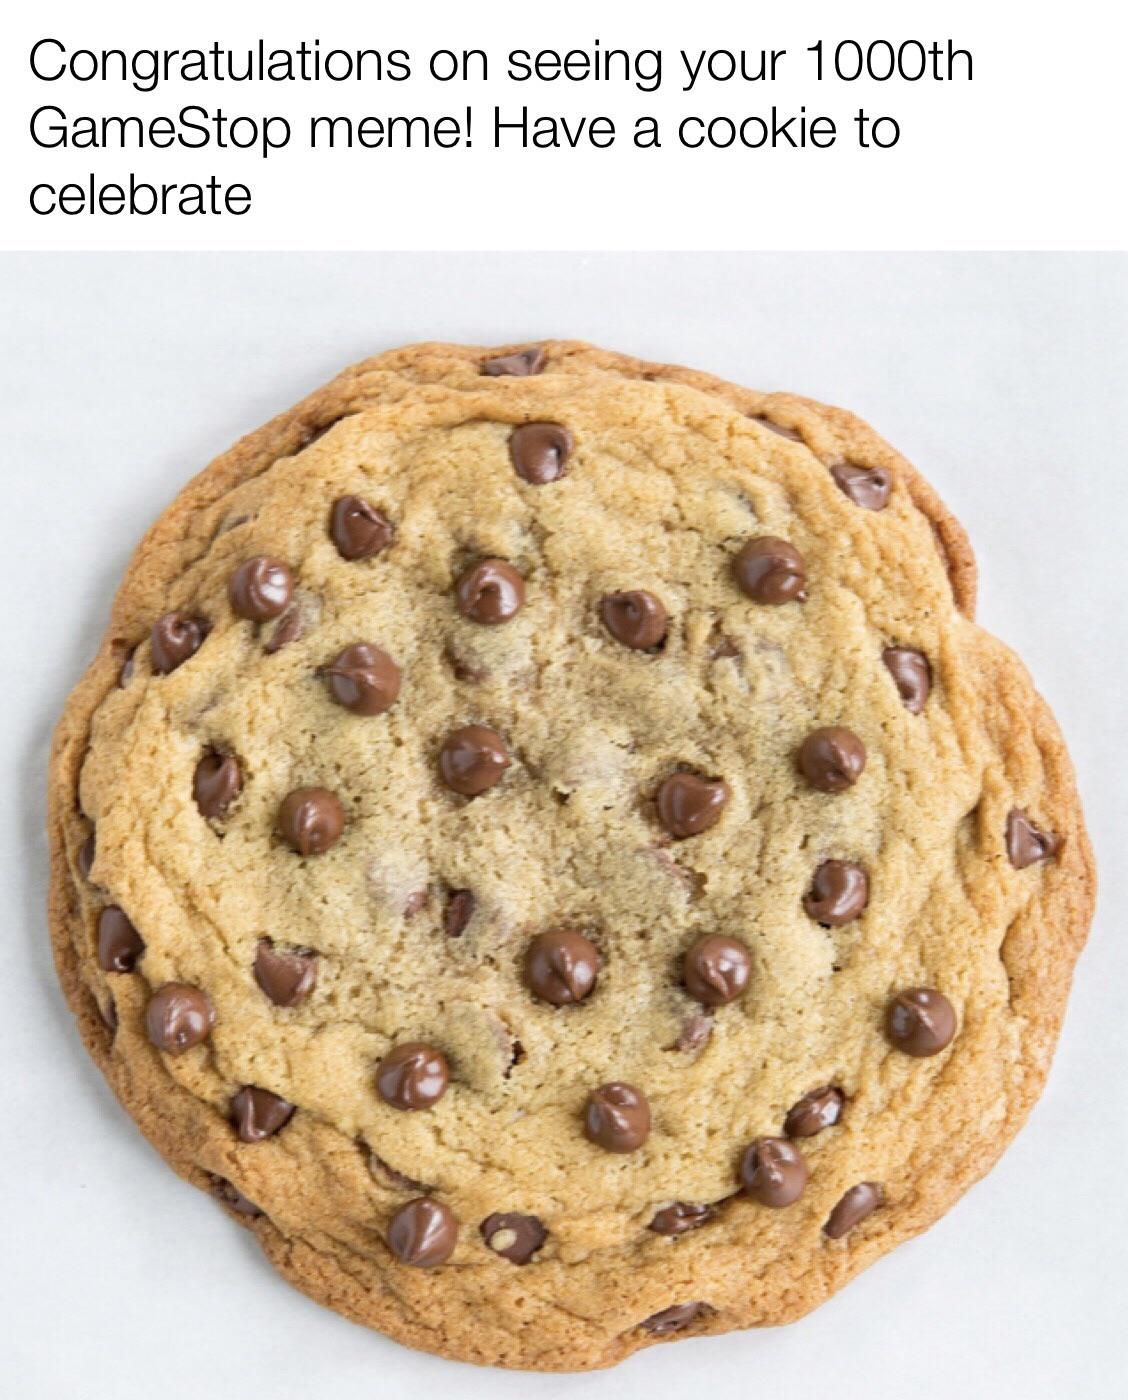 one chocolate chip cookie - Congratulations on seeing your 1000th GameStop meme! Have a cookie to celebrate